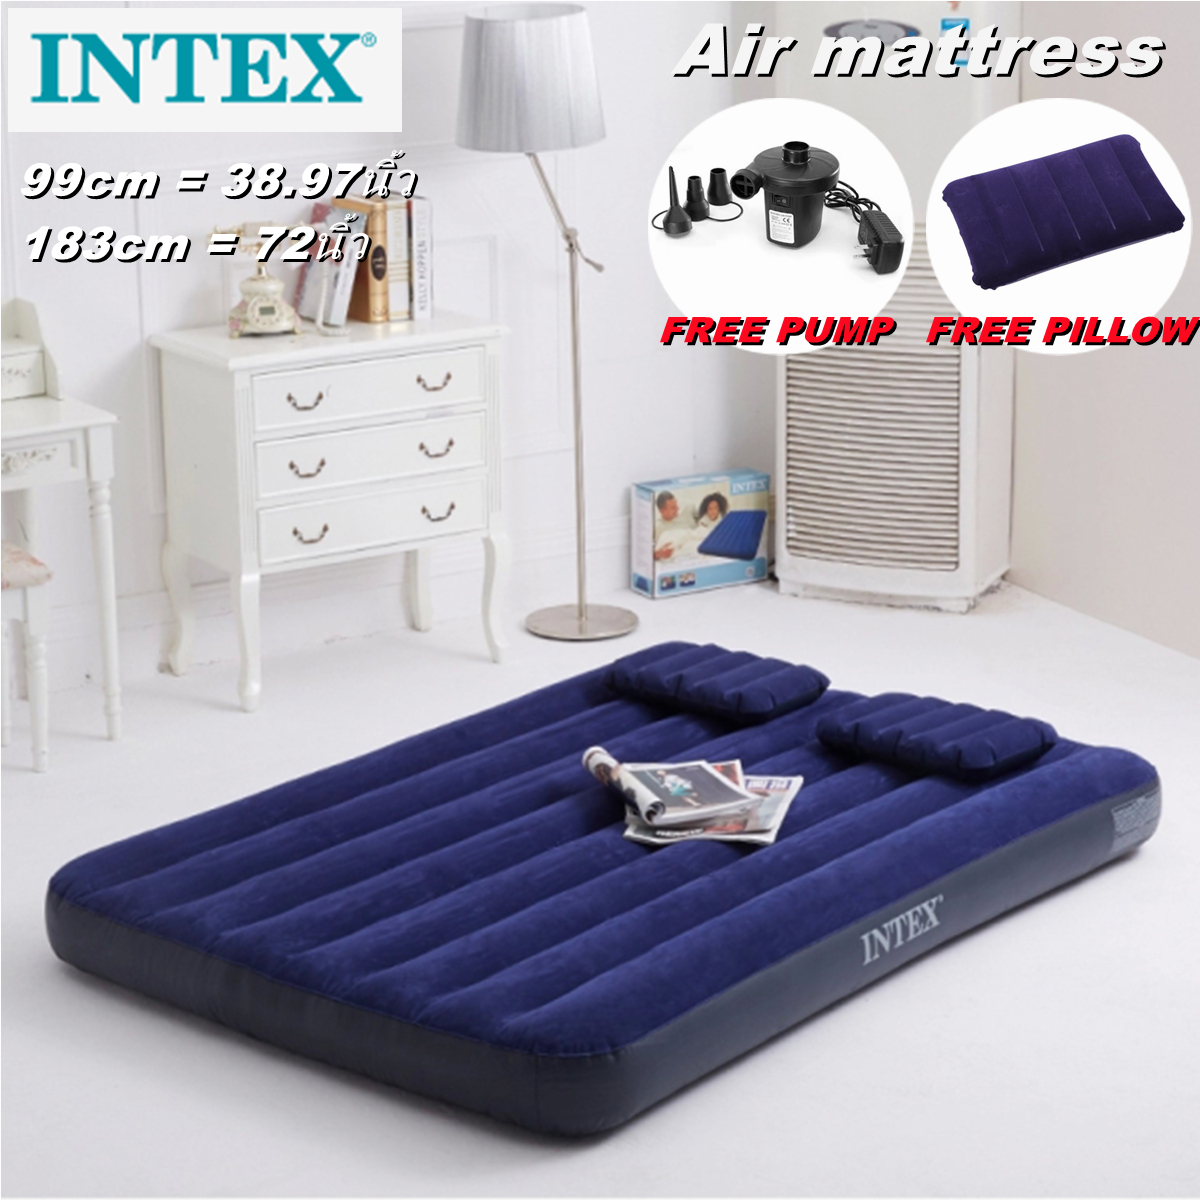 【 Ready Stock 】Unique Mall INTEX 99CM / 183CM Tilam Angin Camping Bed Inflatable Air Bed Mattress Queen Size Thicken 25CM ( Free Electric Pump )